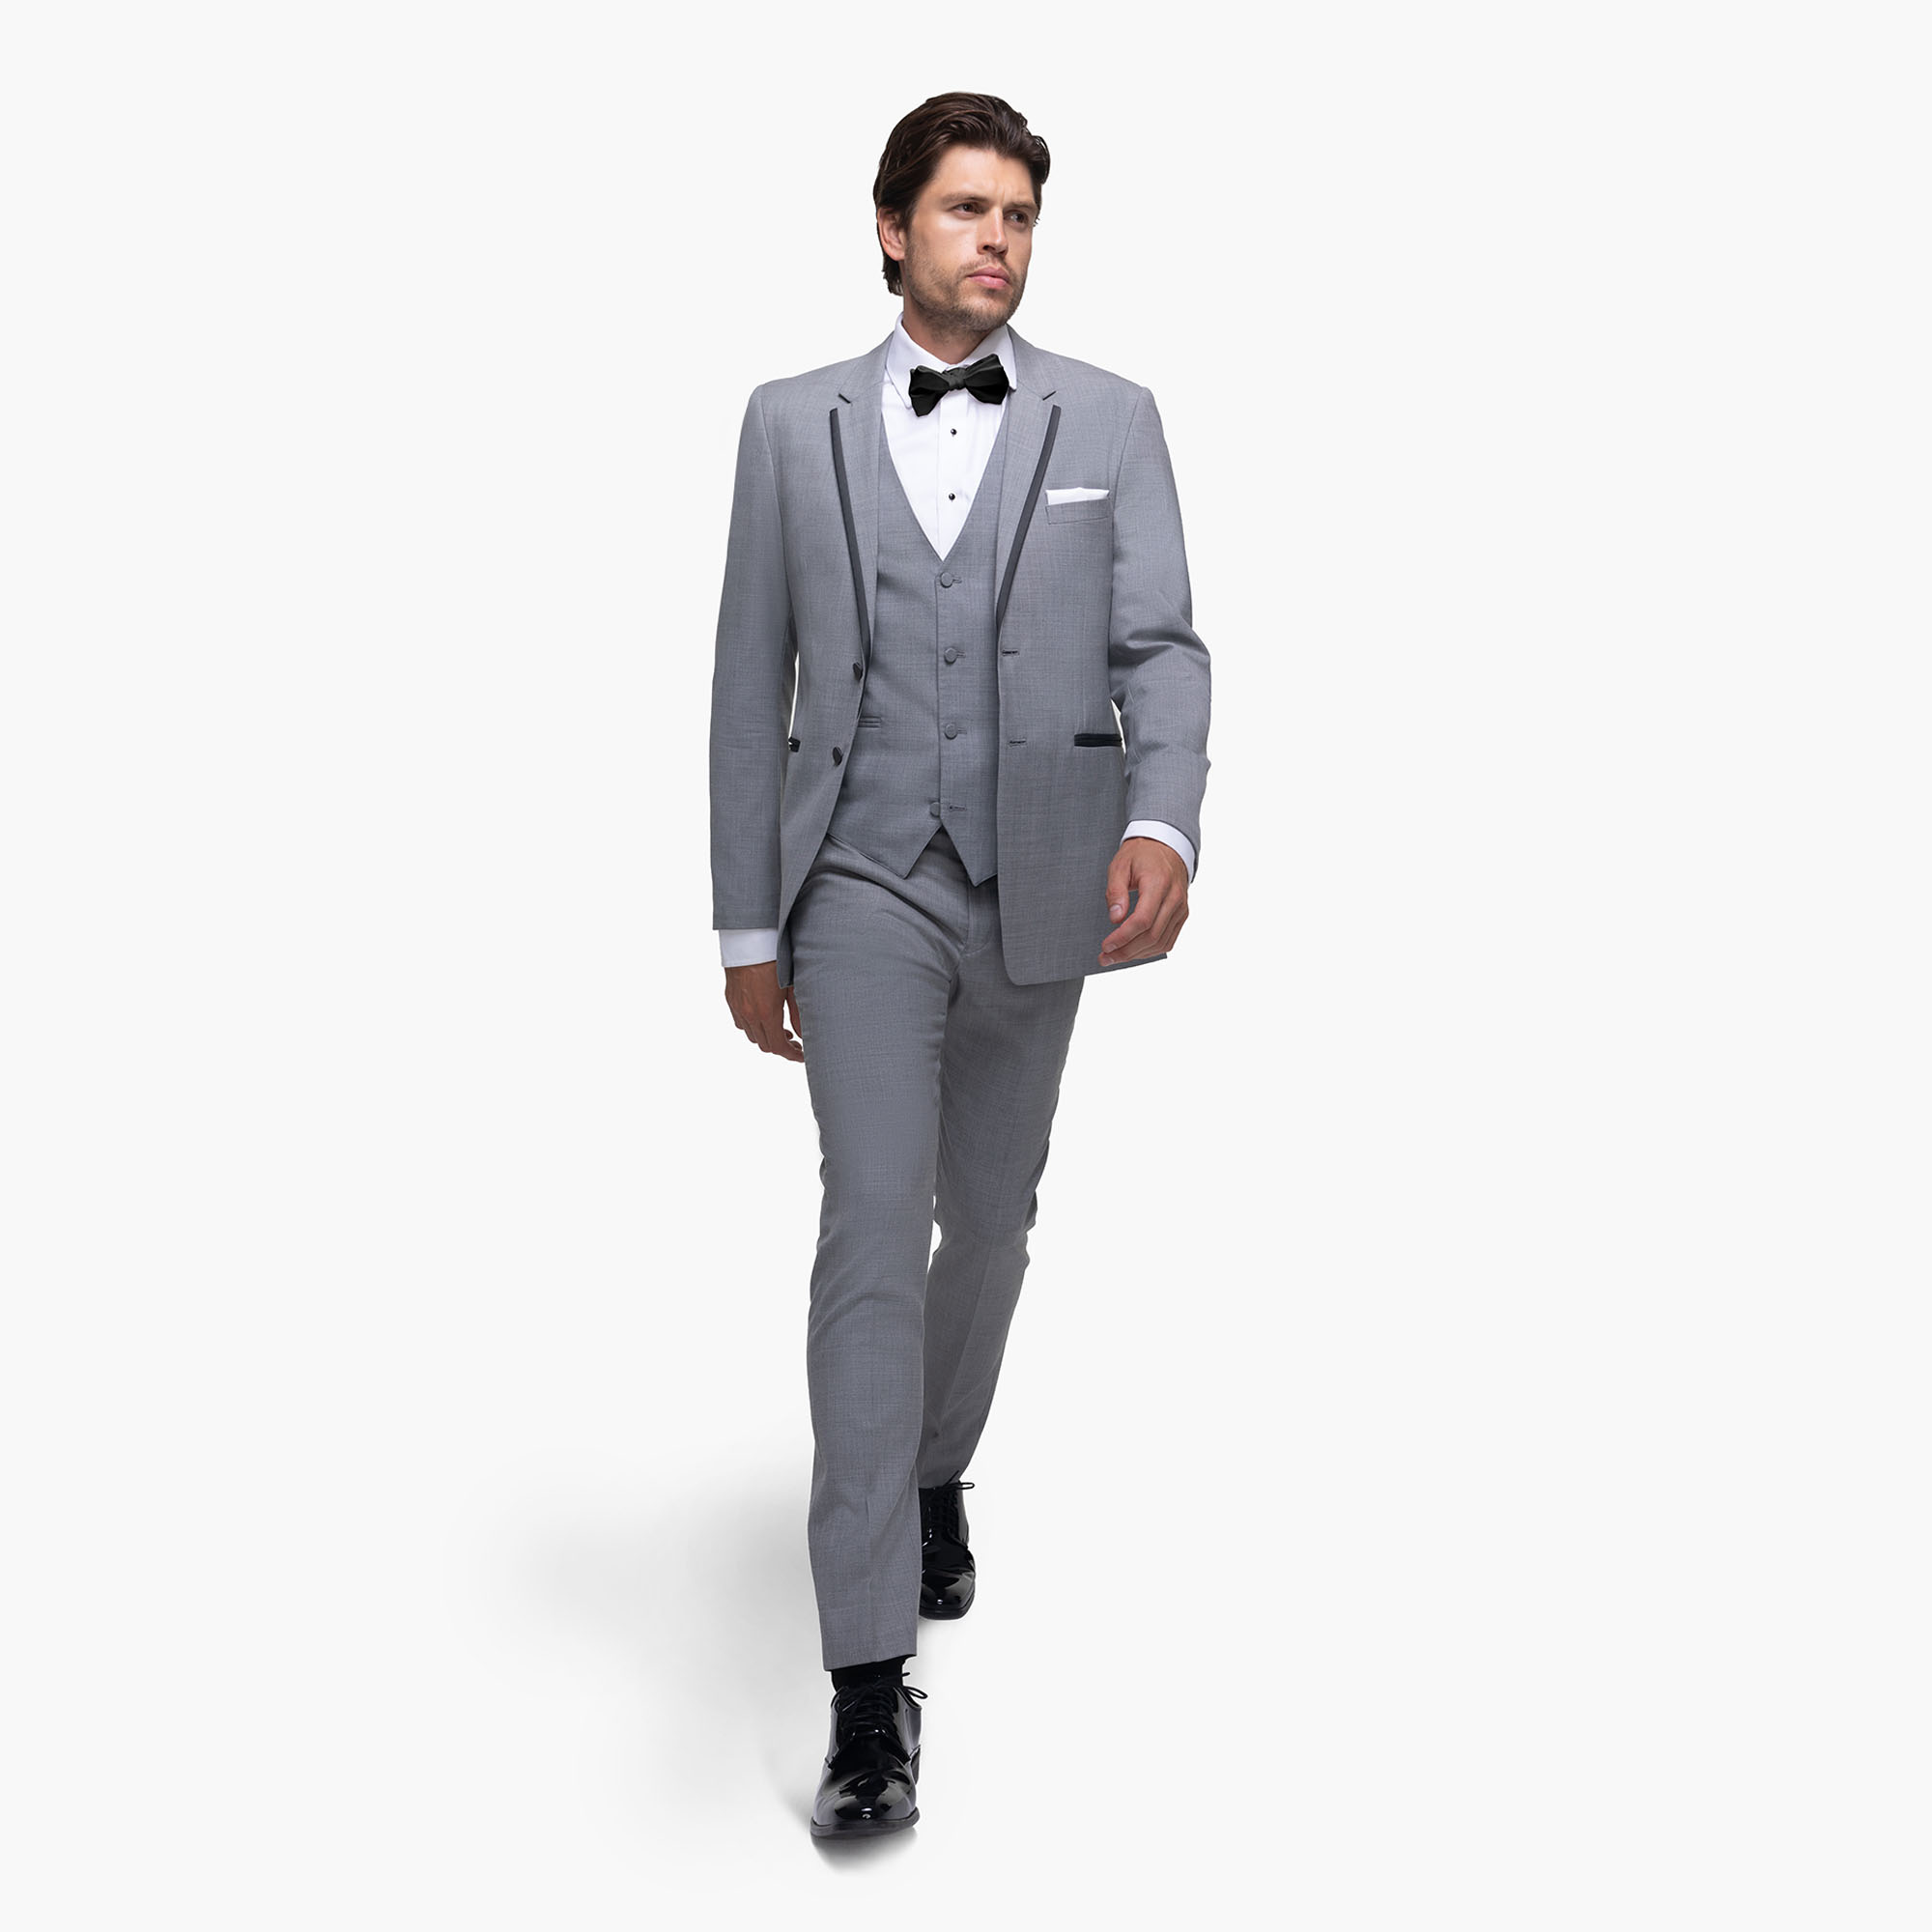 35+ Formal Suits For Grooms That We Are Swooning Over